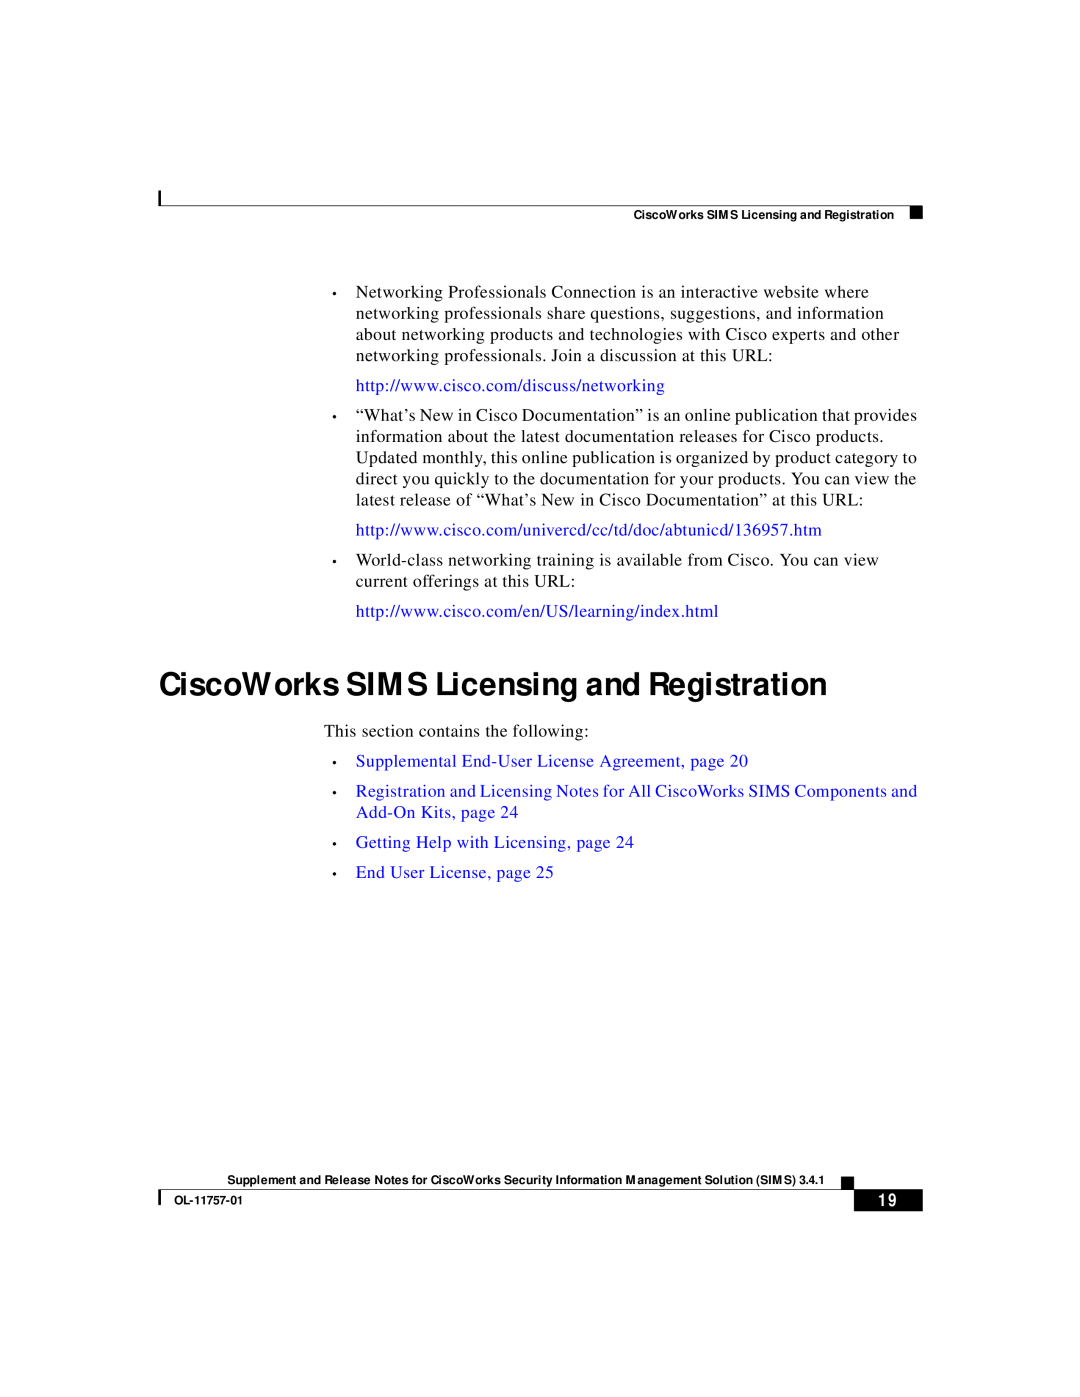 Cisco Systems OL-11757-01 manual CiscoWorks SIMS Licensing and Registration, Supplemental End-UserLicense Agreement, page 